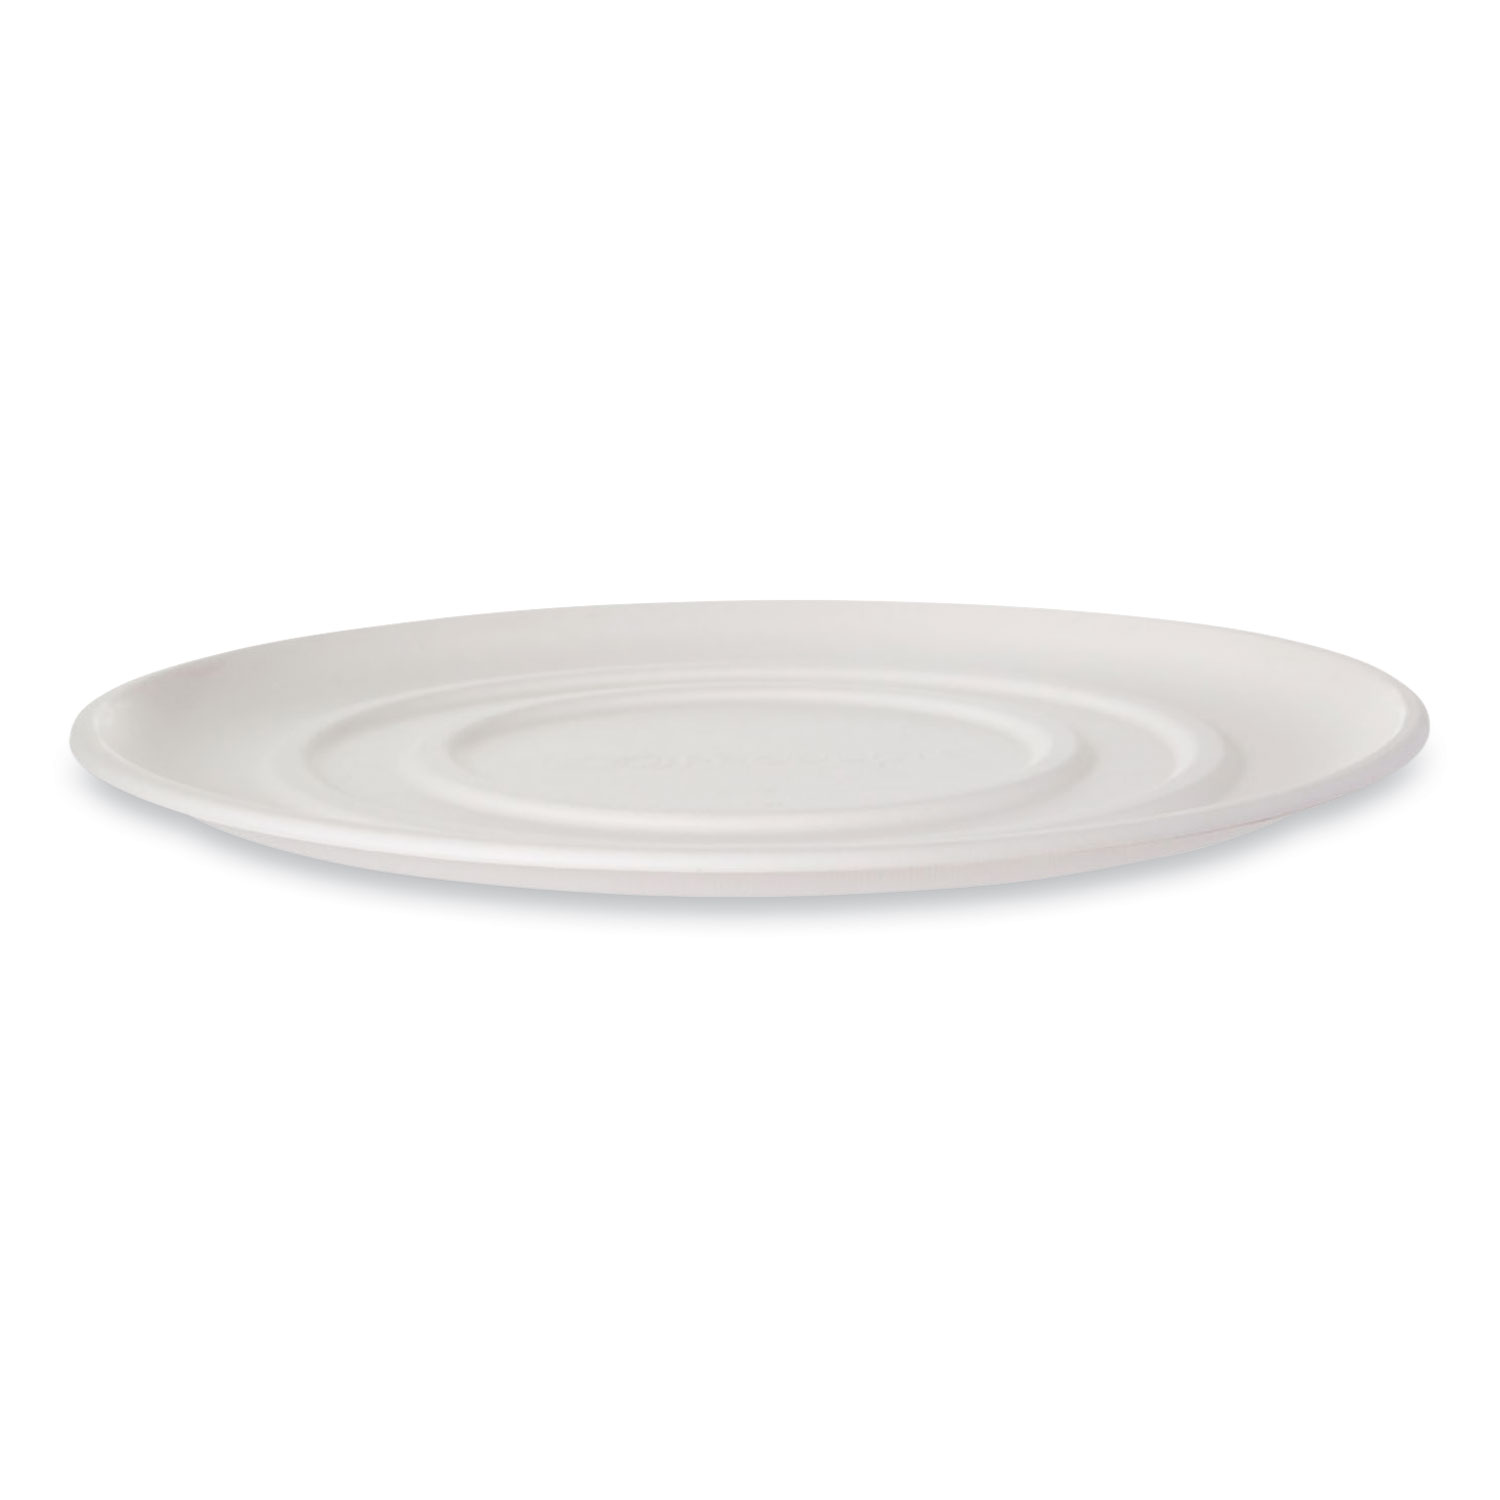 Eco-Products® WorldView Sugarcane Pizza Trays, 16 x 16 x 02, White, 50/Carton